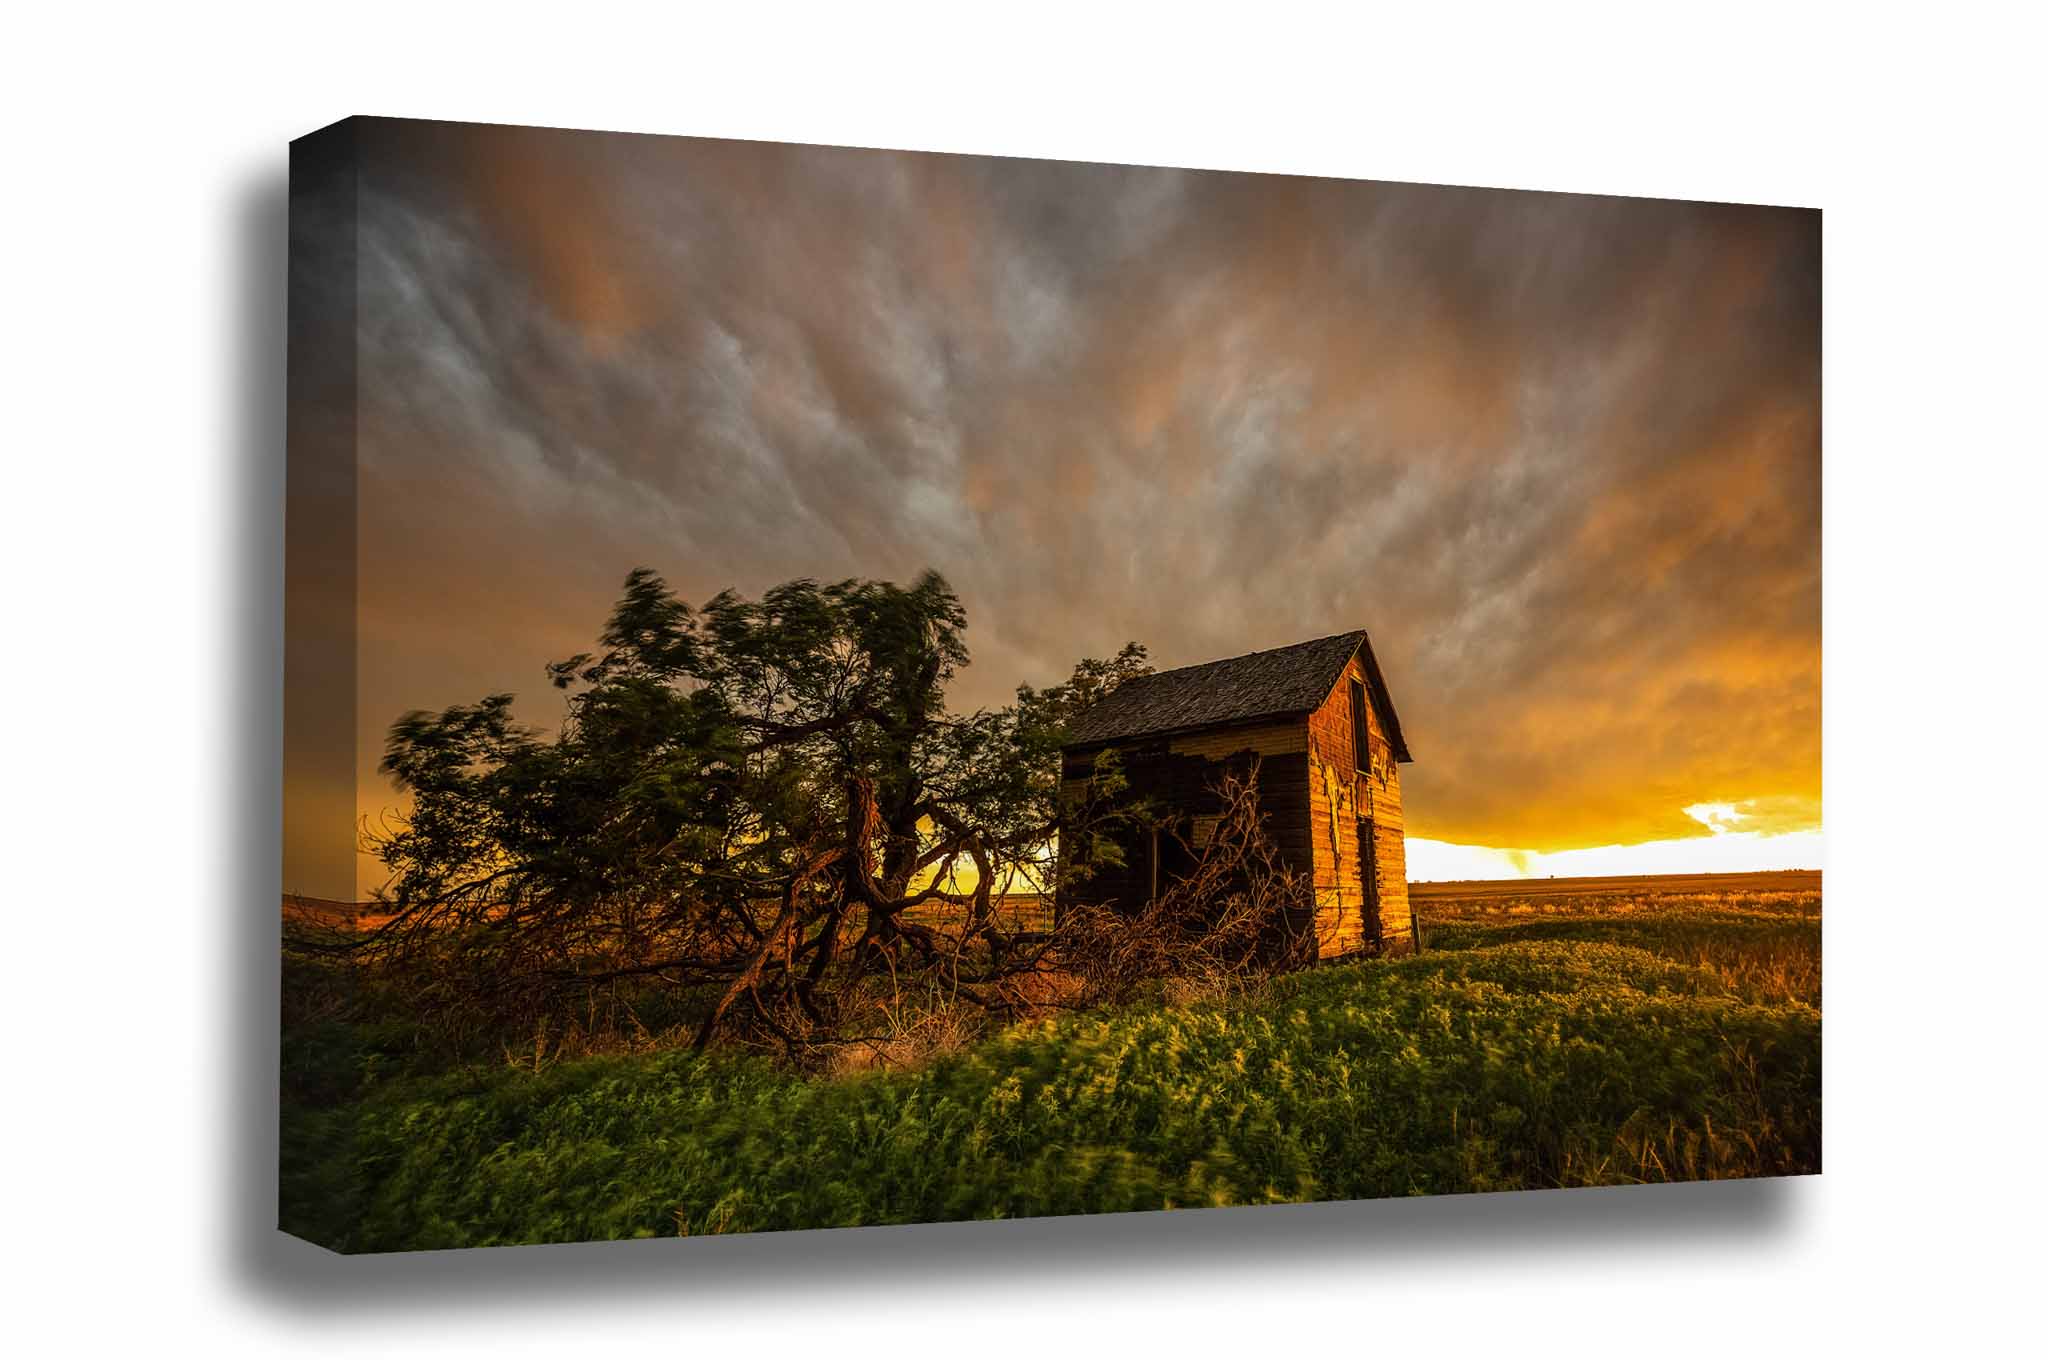 Country canvas wall art of an old red barn and windswept tree under a dramatic stormy sky at sunset in Oklahoma by Sean Ramsey of Southern Plains Photography.